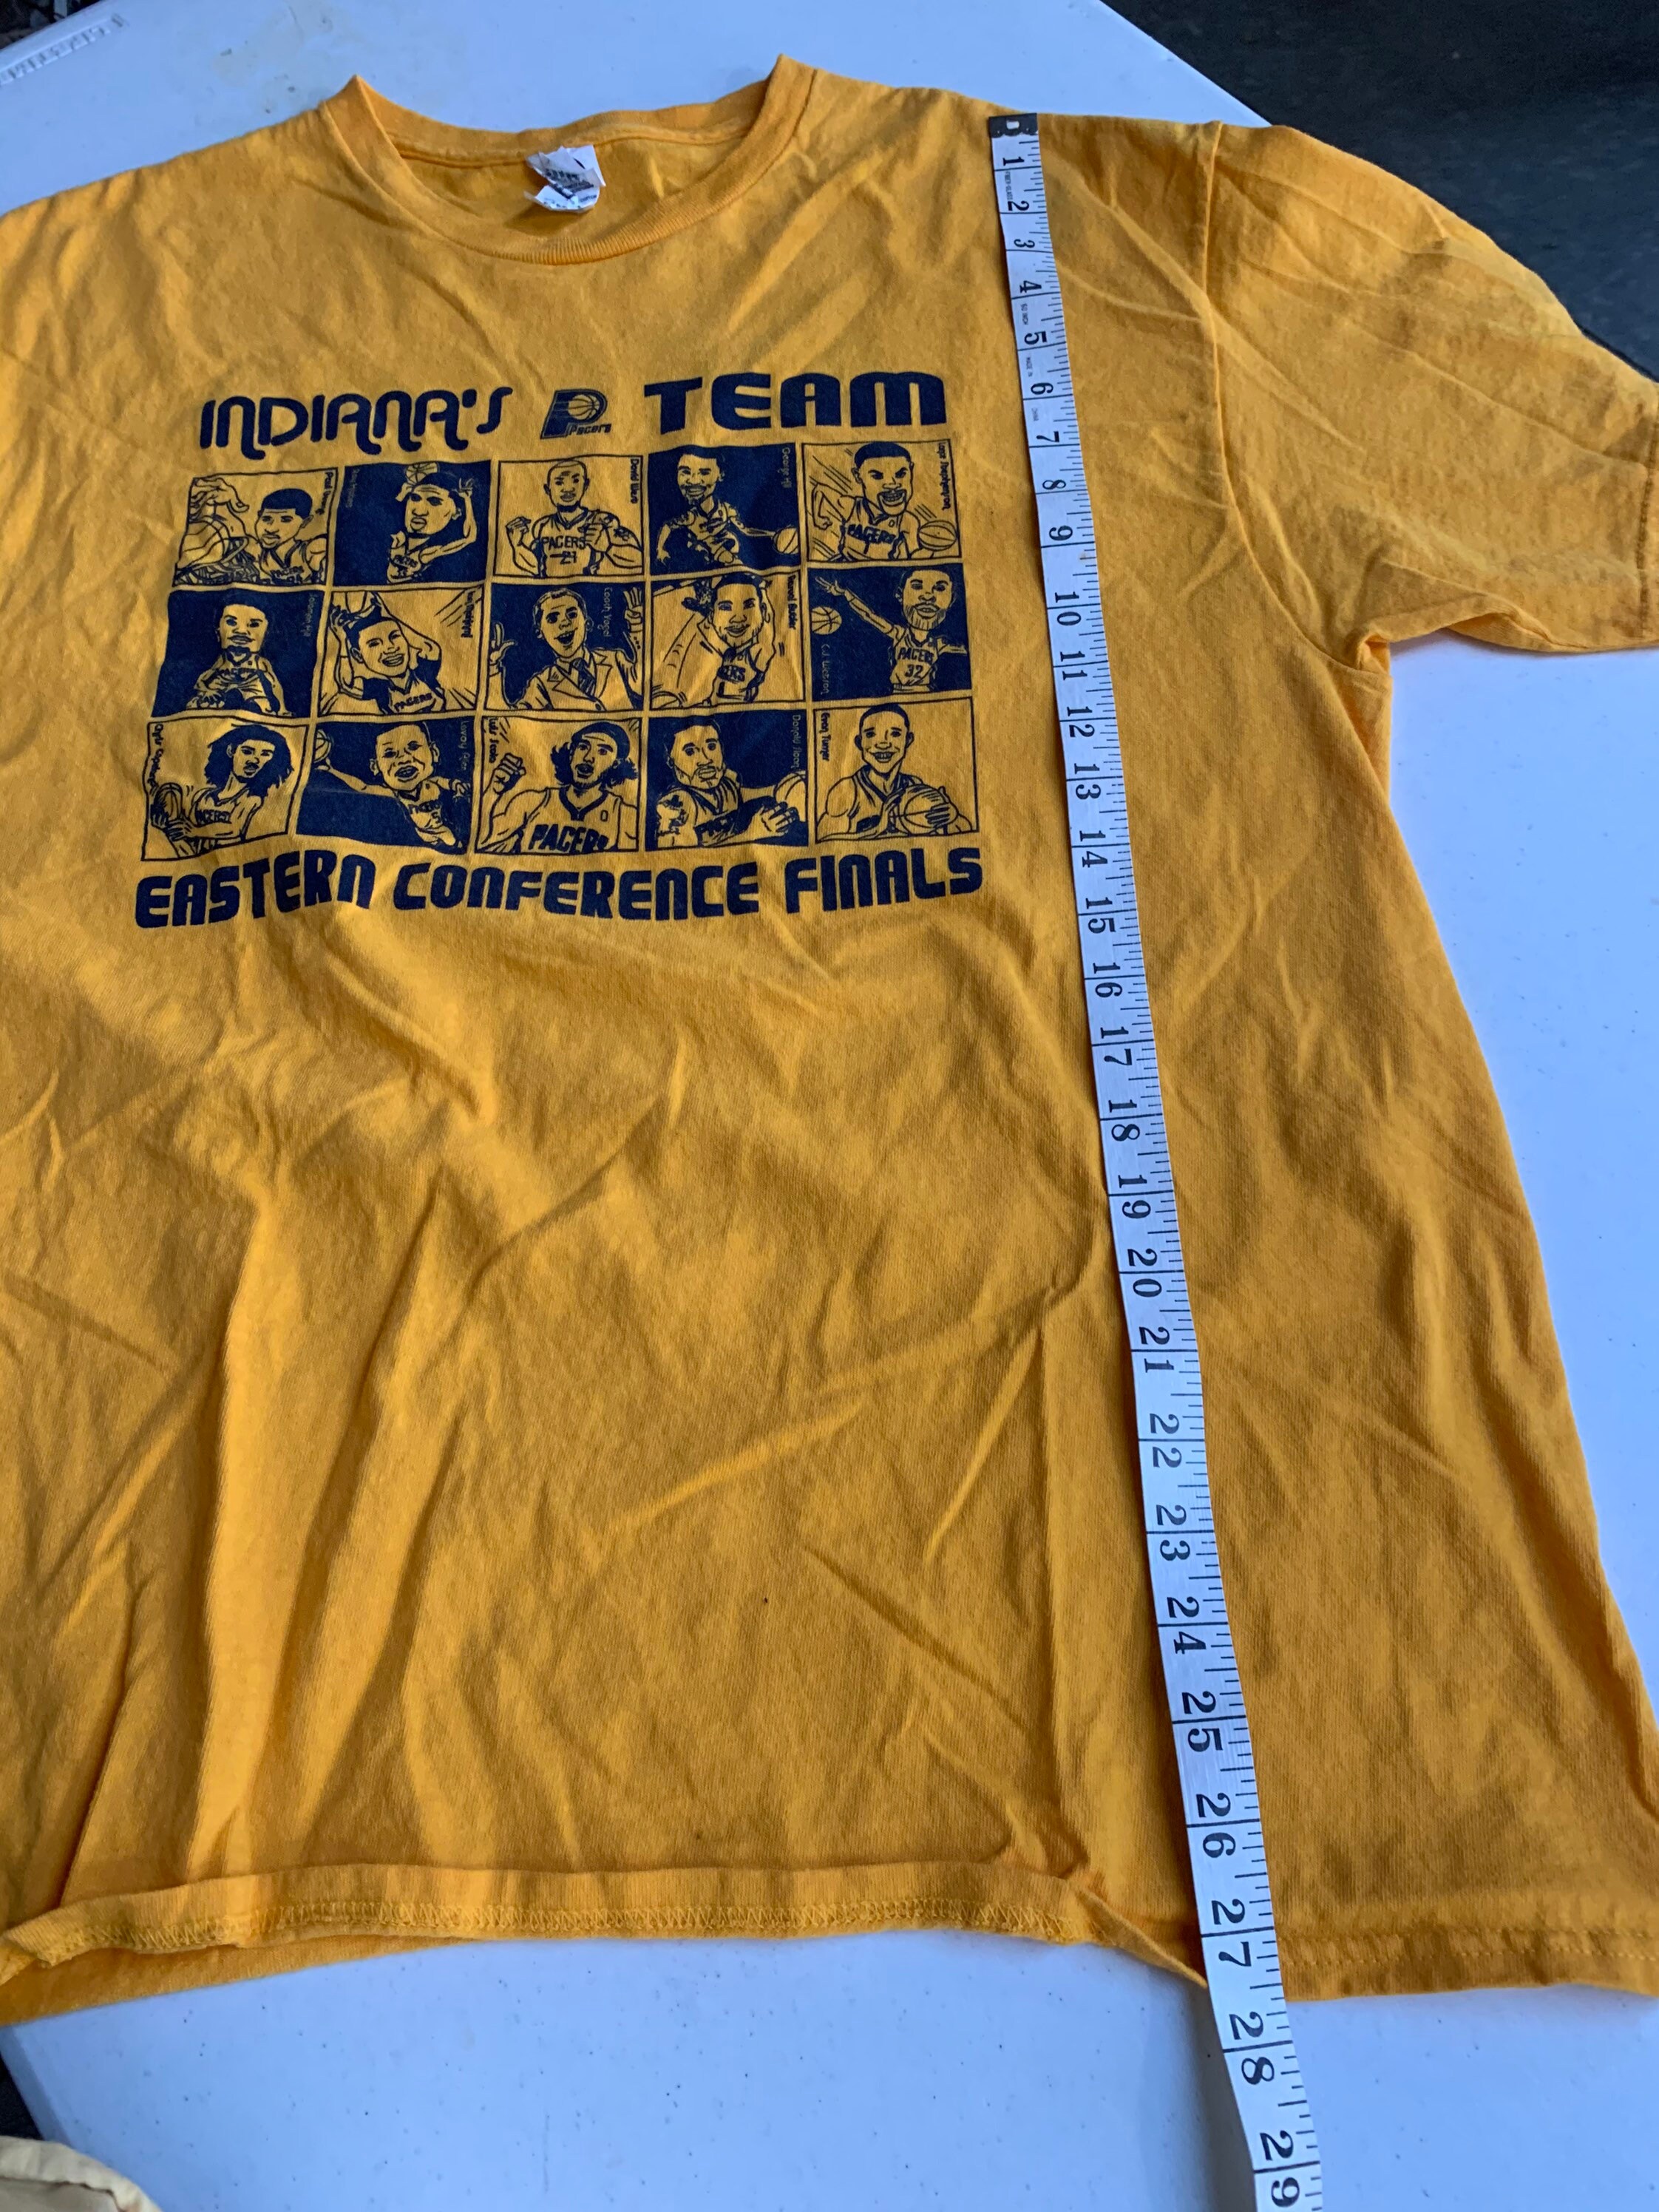 Vintage317Indy Old Indiana Pacers Players T Shirt 2014 Eastern Conference Finals XL Paul George David West Lance Stephenson